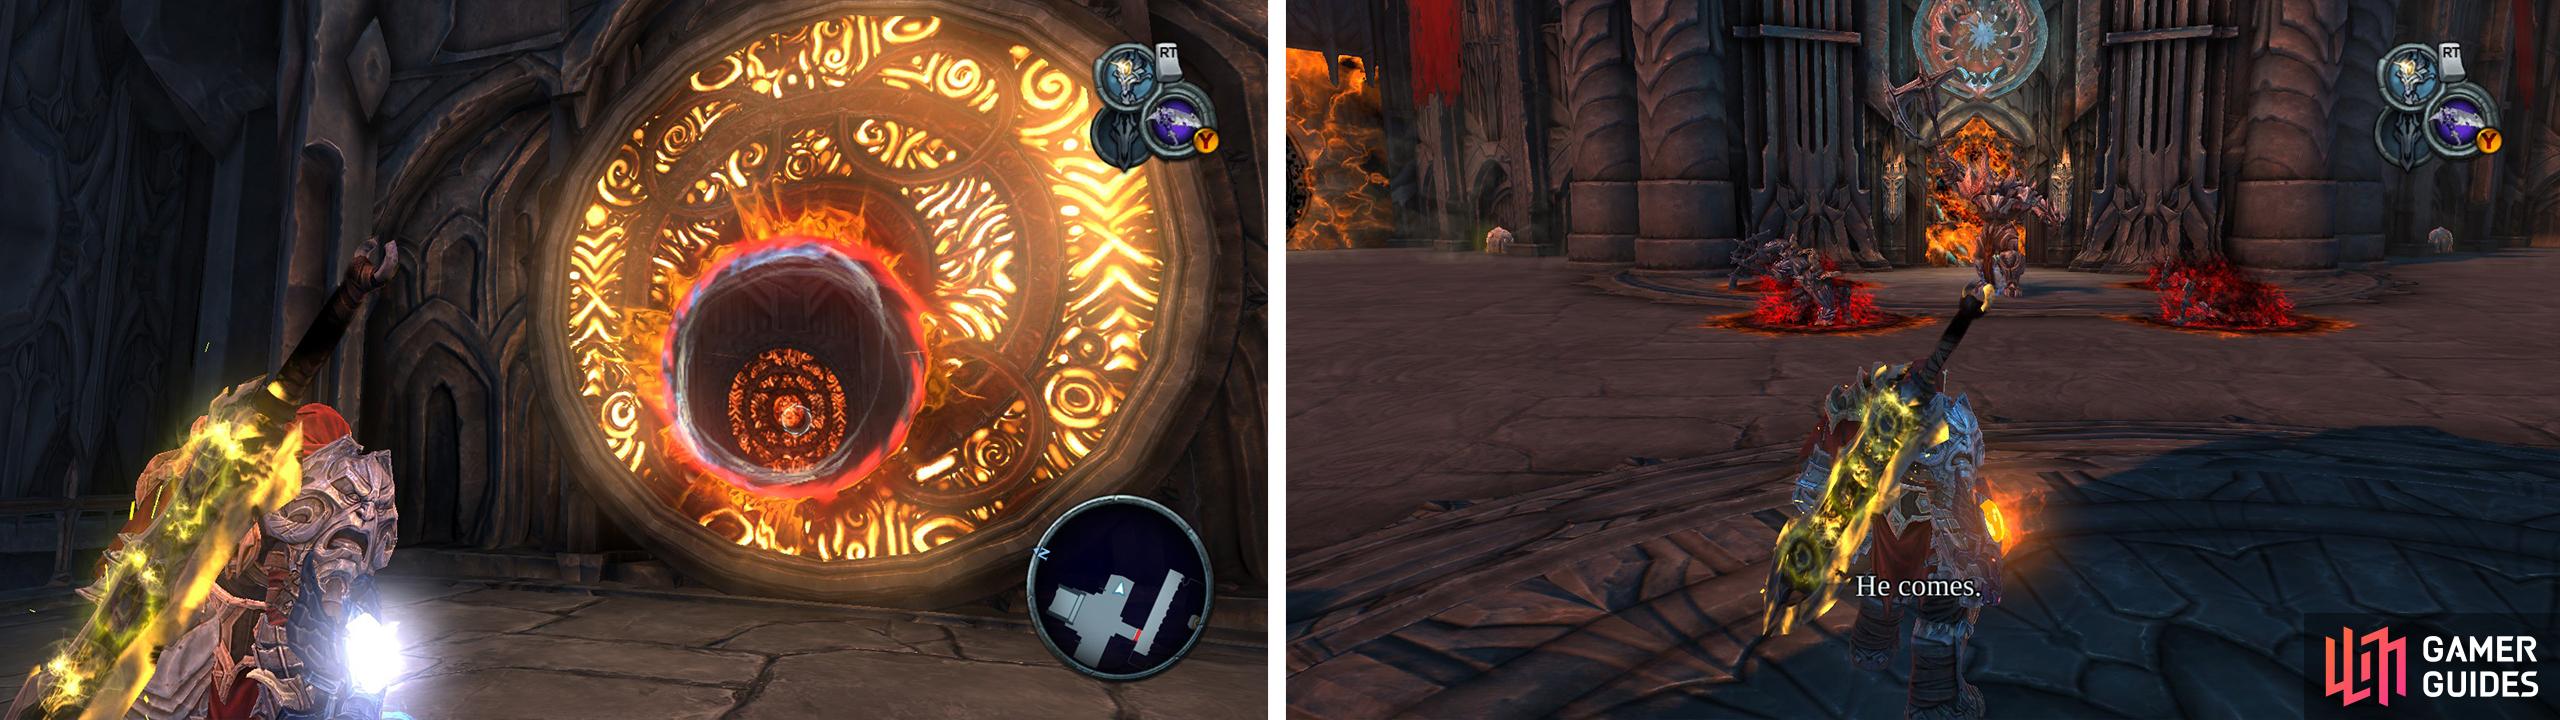 Shoot a portal through a portal to hit the far column (left). Jump through and kill the enemies waiting for you on the far side of the chasm (right).